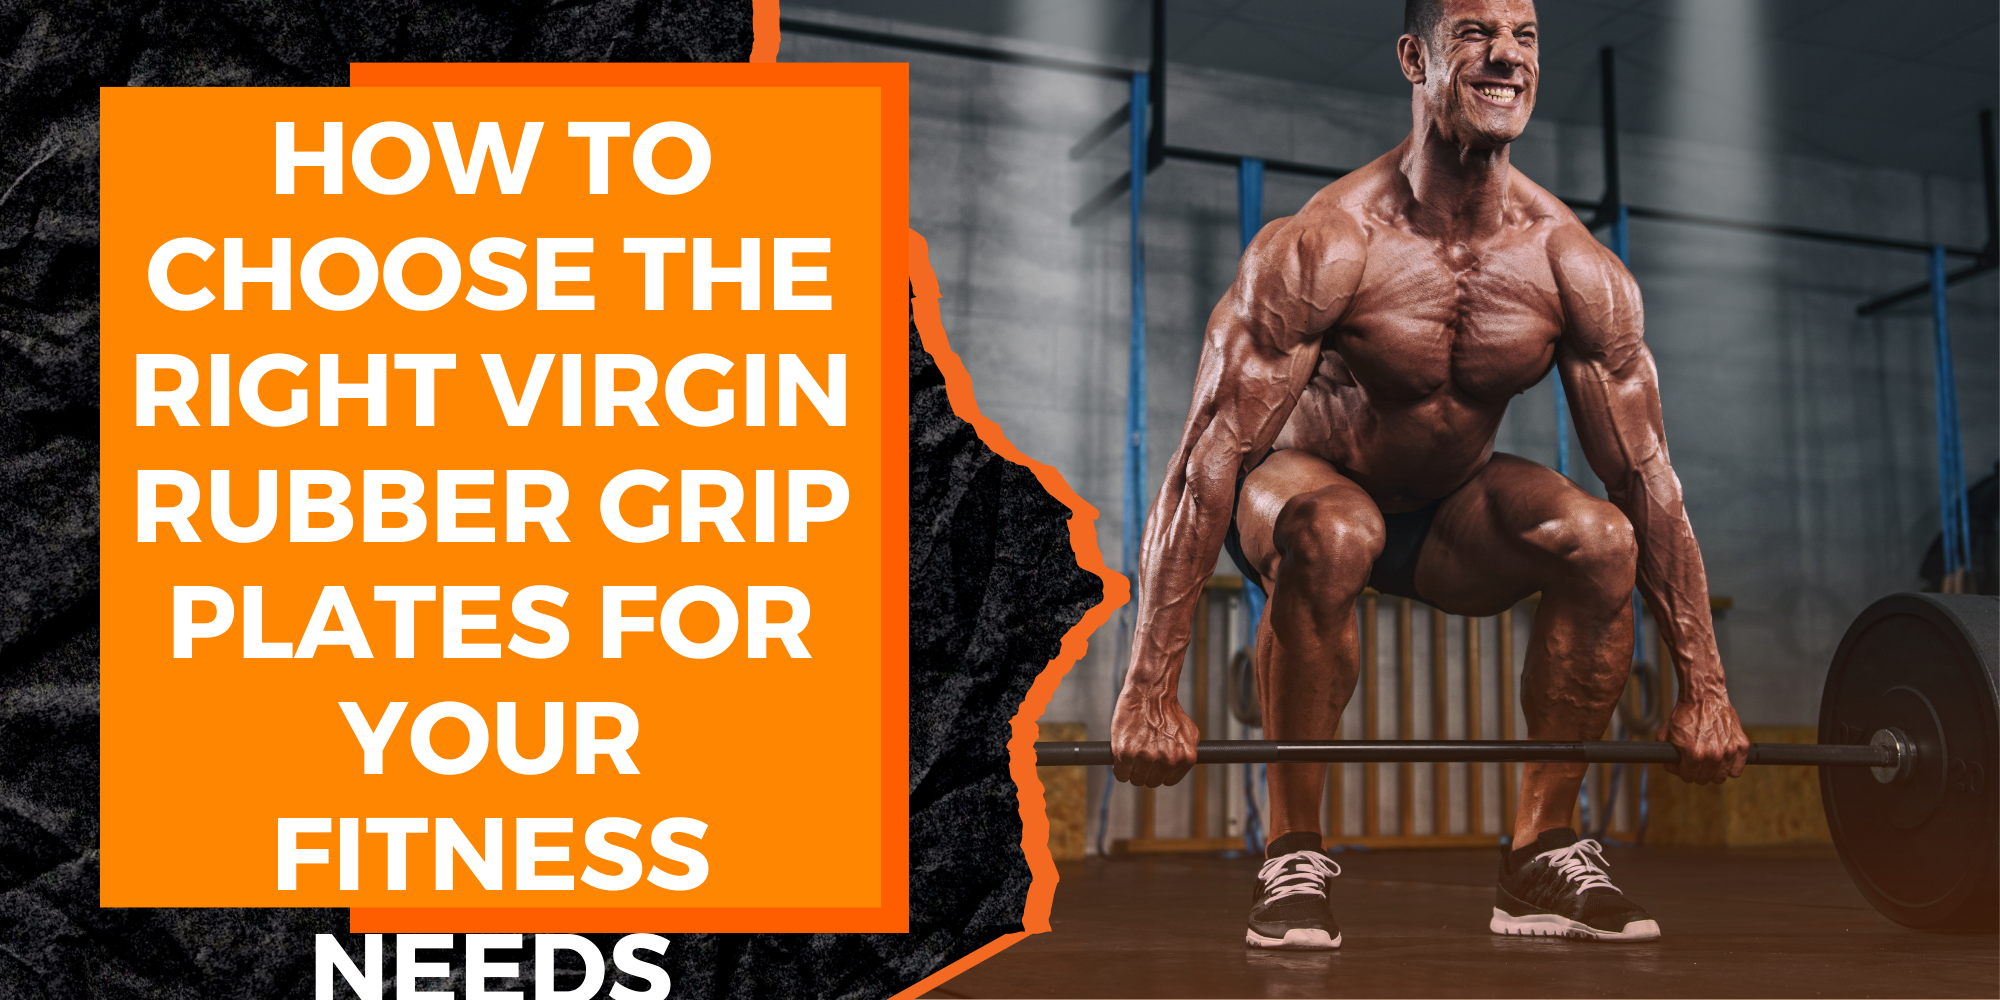 How to Choose the Right Virgin Rubber Grip Plates for Your Fitness Needs